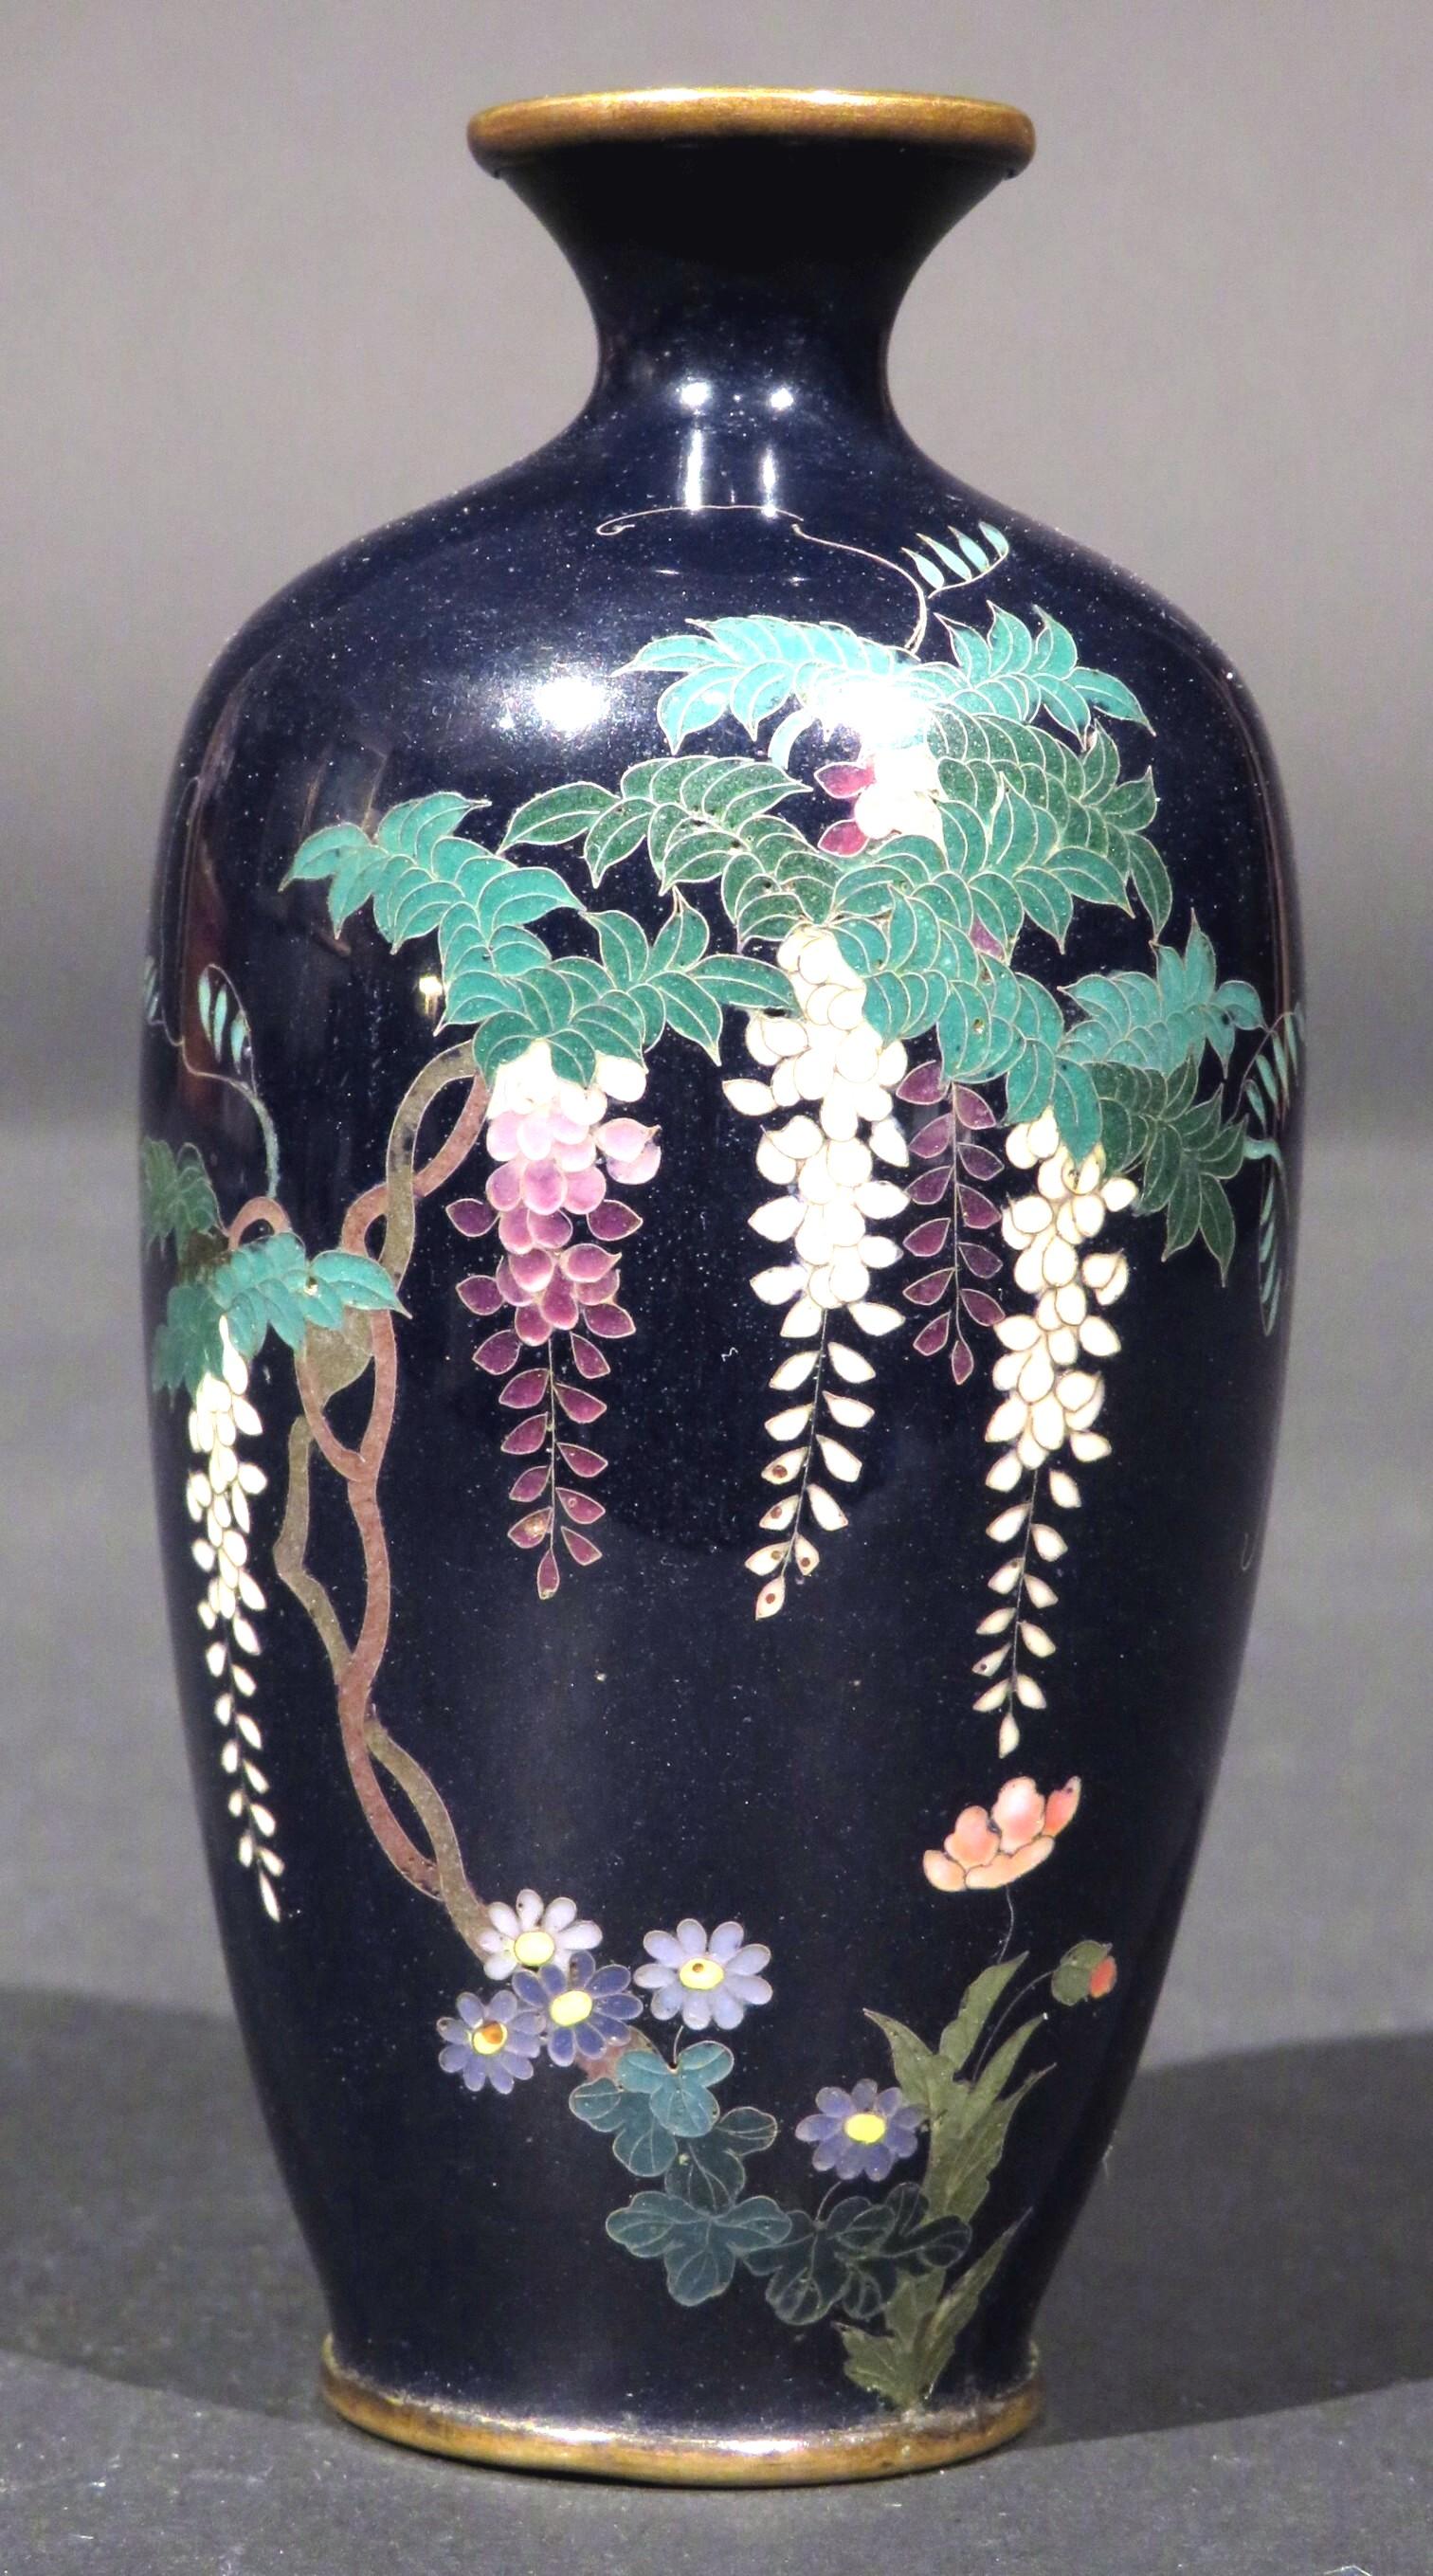 The baluster shaped body rising to a flaring neck & rim, richly decorated with flowering boughs of wisteria & exotic flora finely worked in silver wire and enamels, set against an indigo blue ground.
 